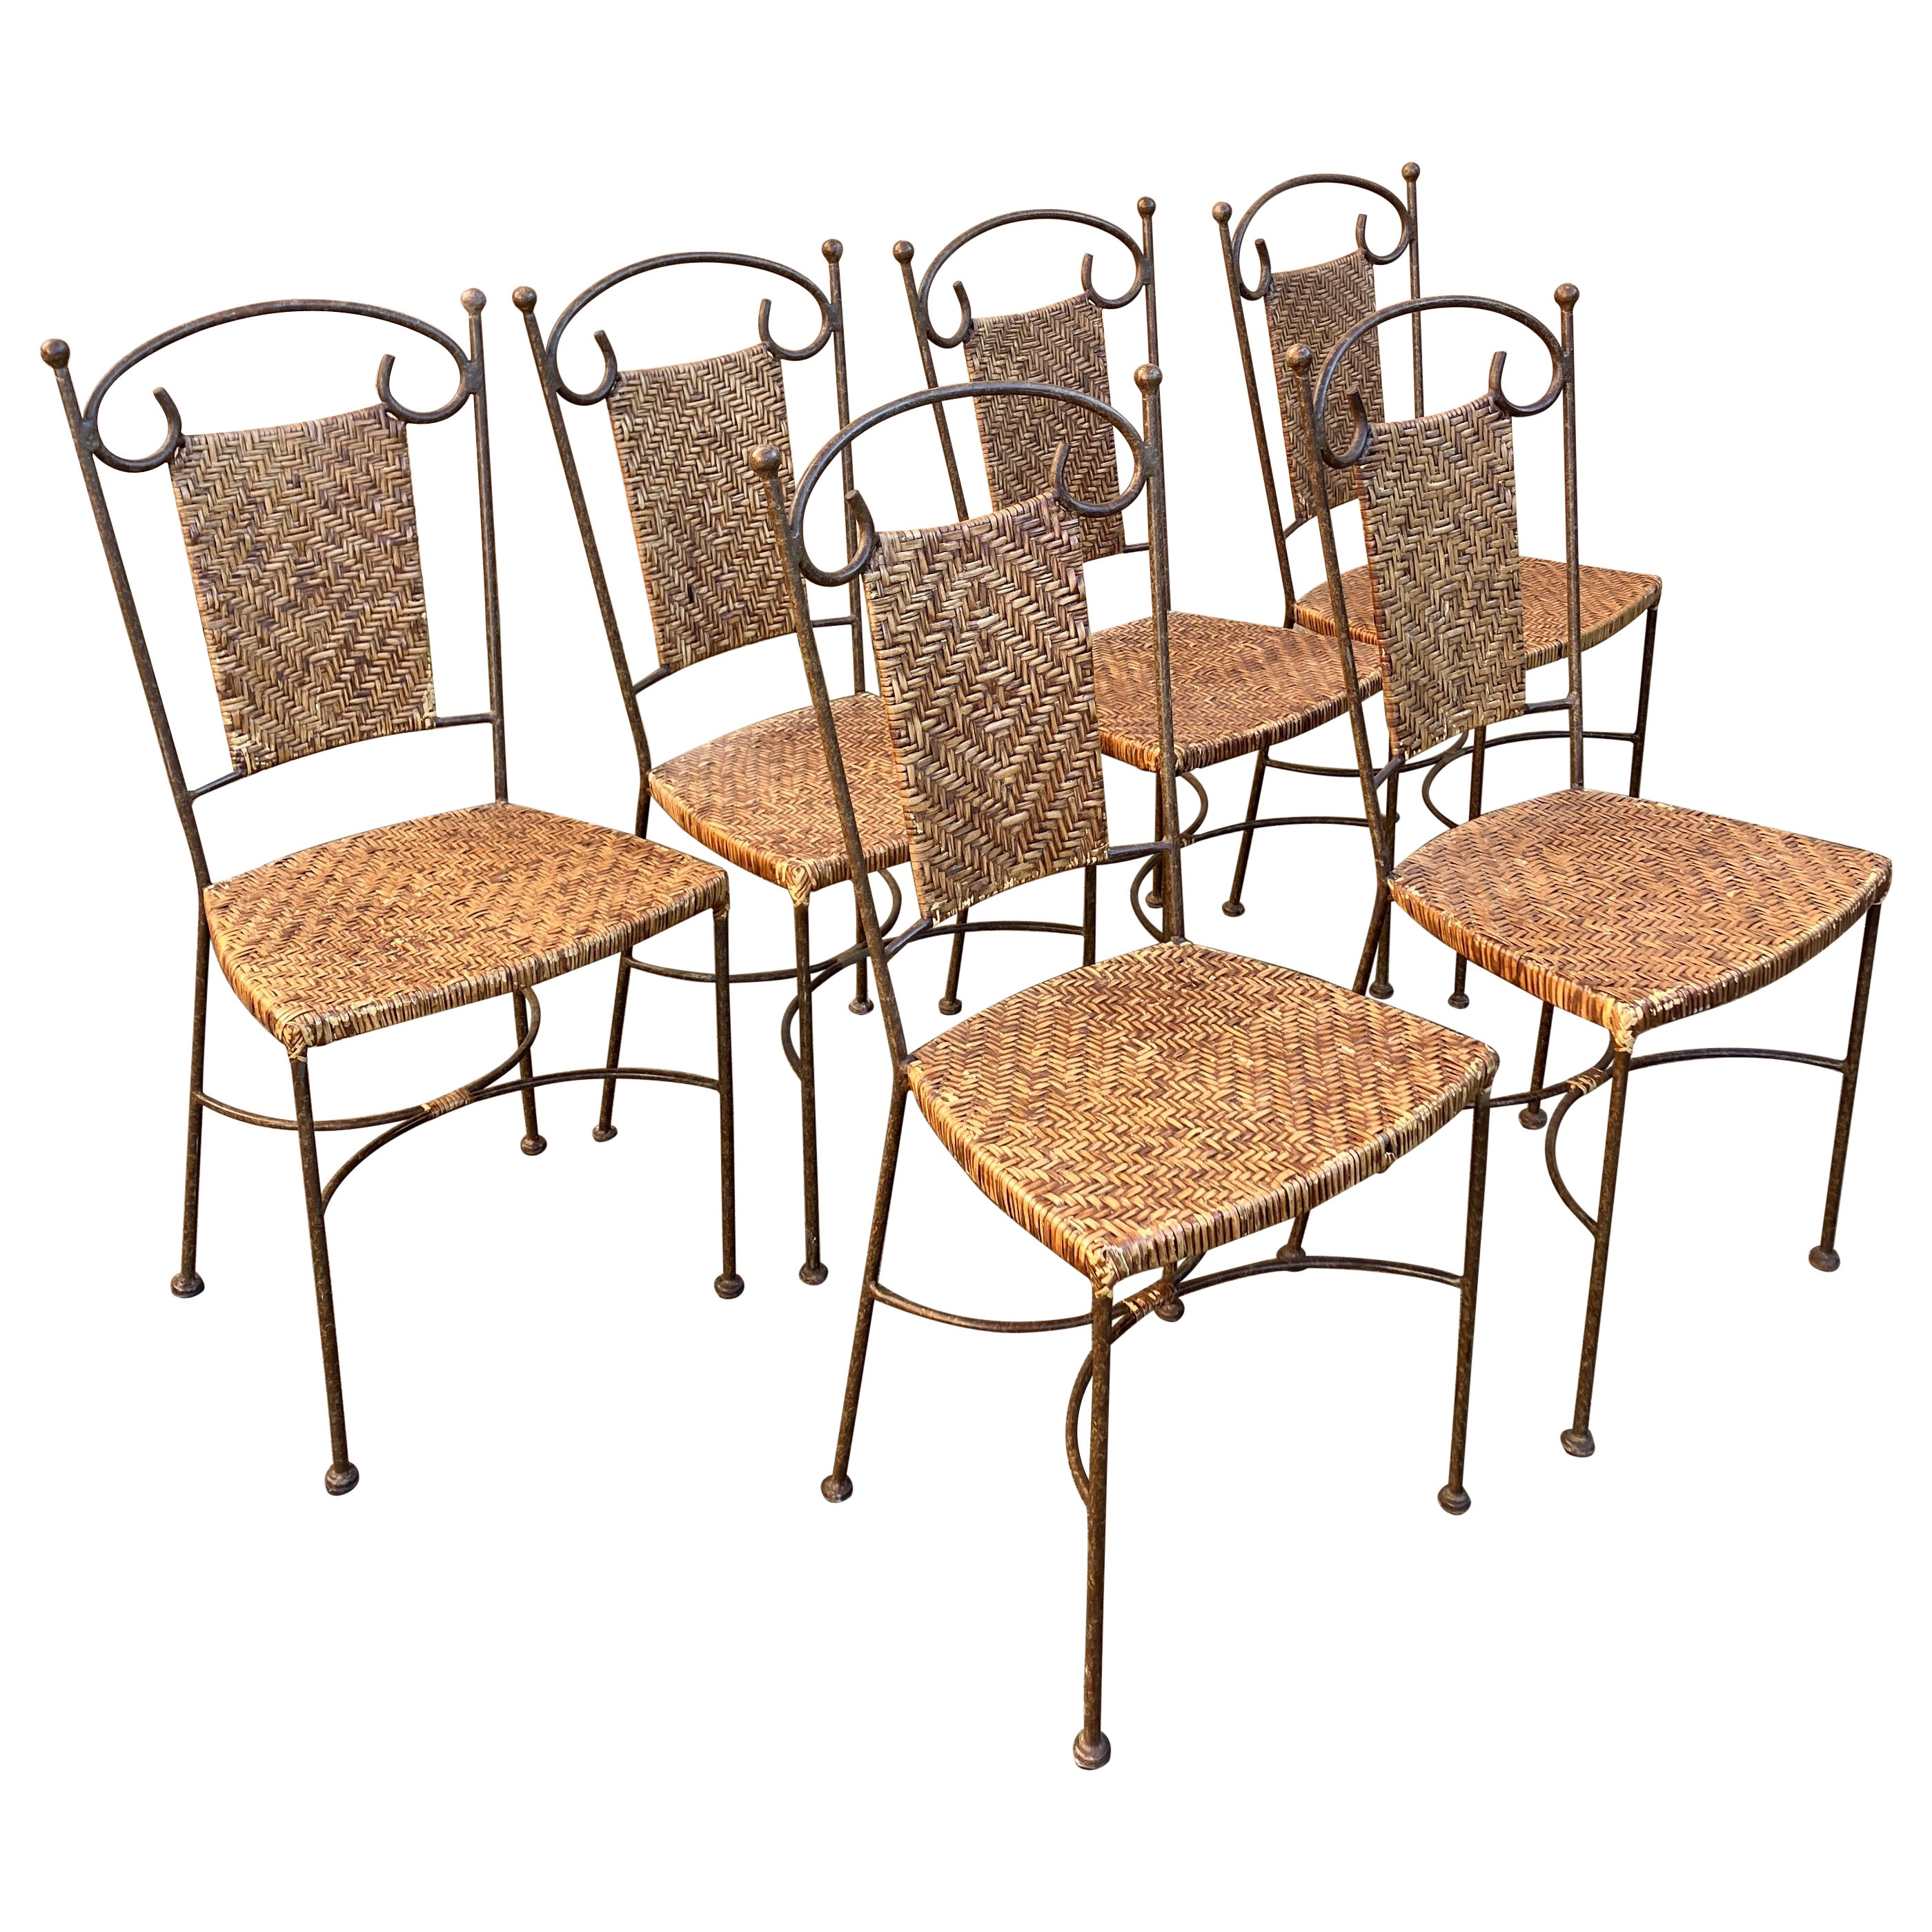 Vintage wrought Iron Dining Chairs with Wicker Seating x 6 For Sale